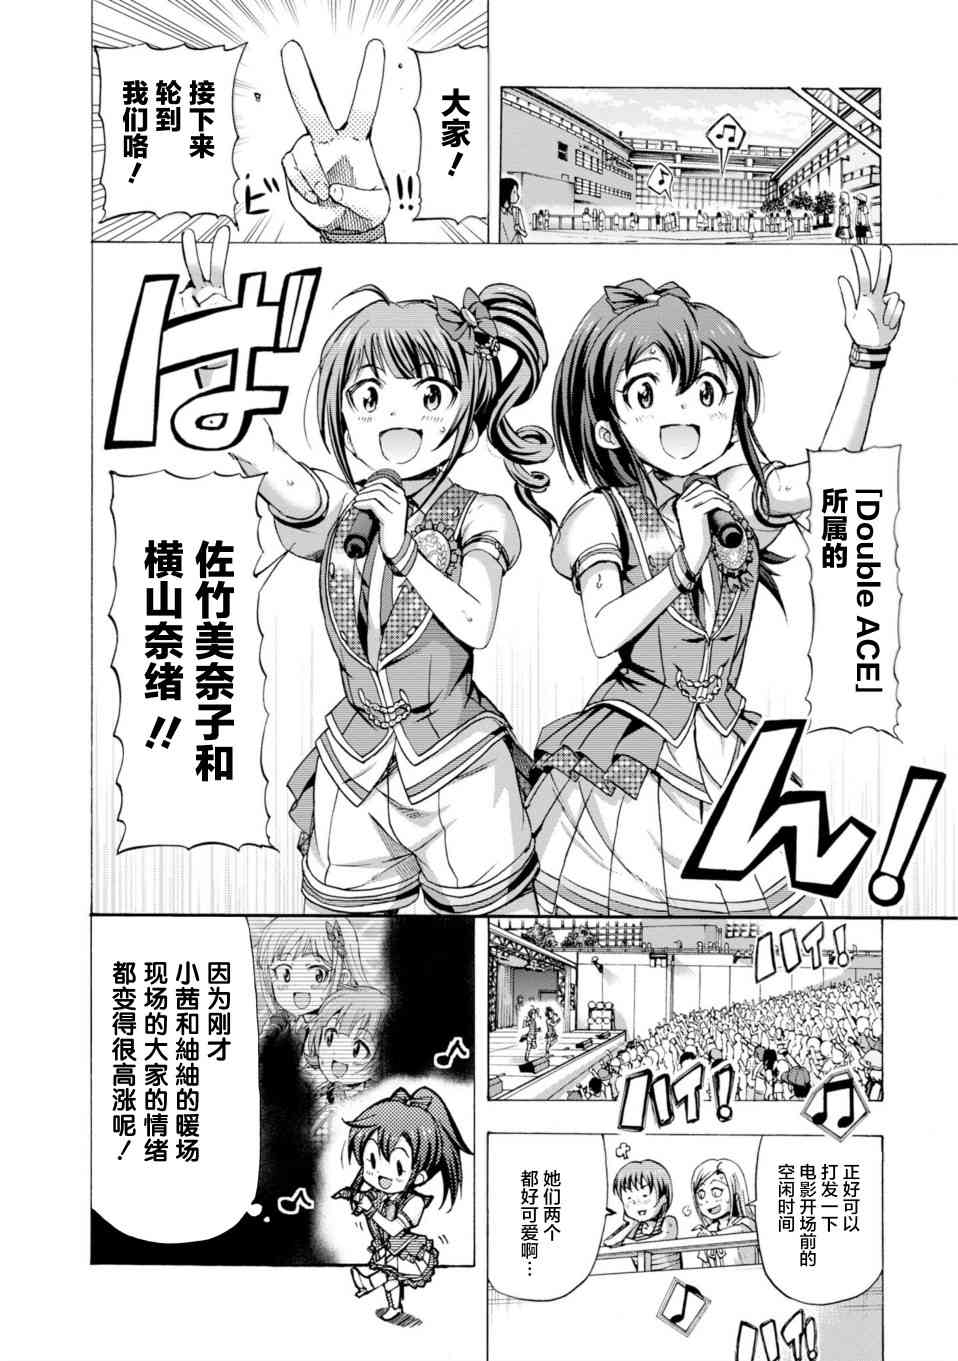 THE IDOLM@STER MILLION LIVE! Blooming Clover - 17話 - 4